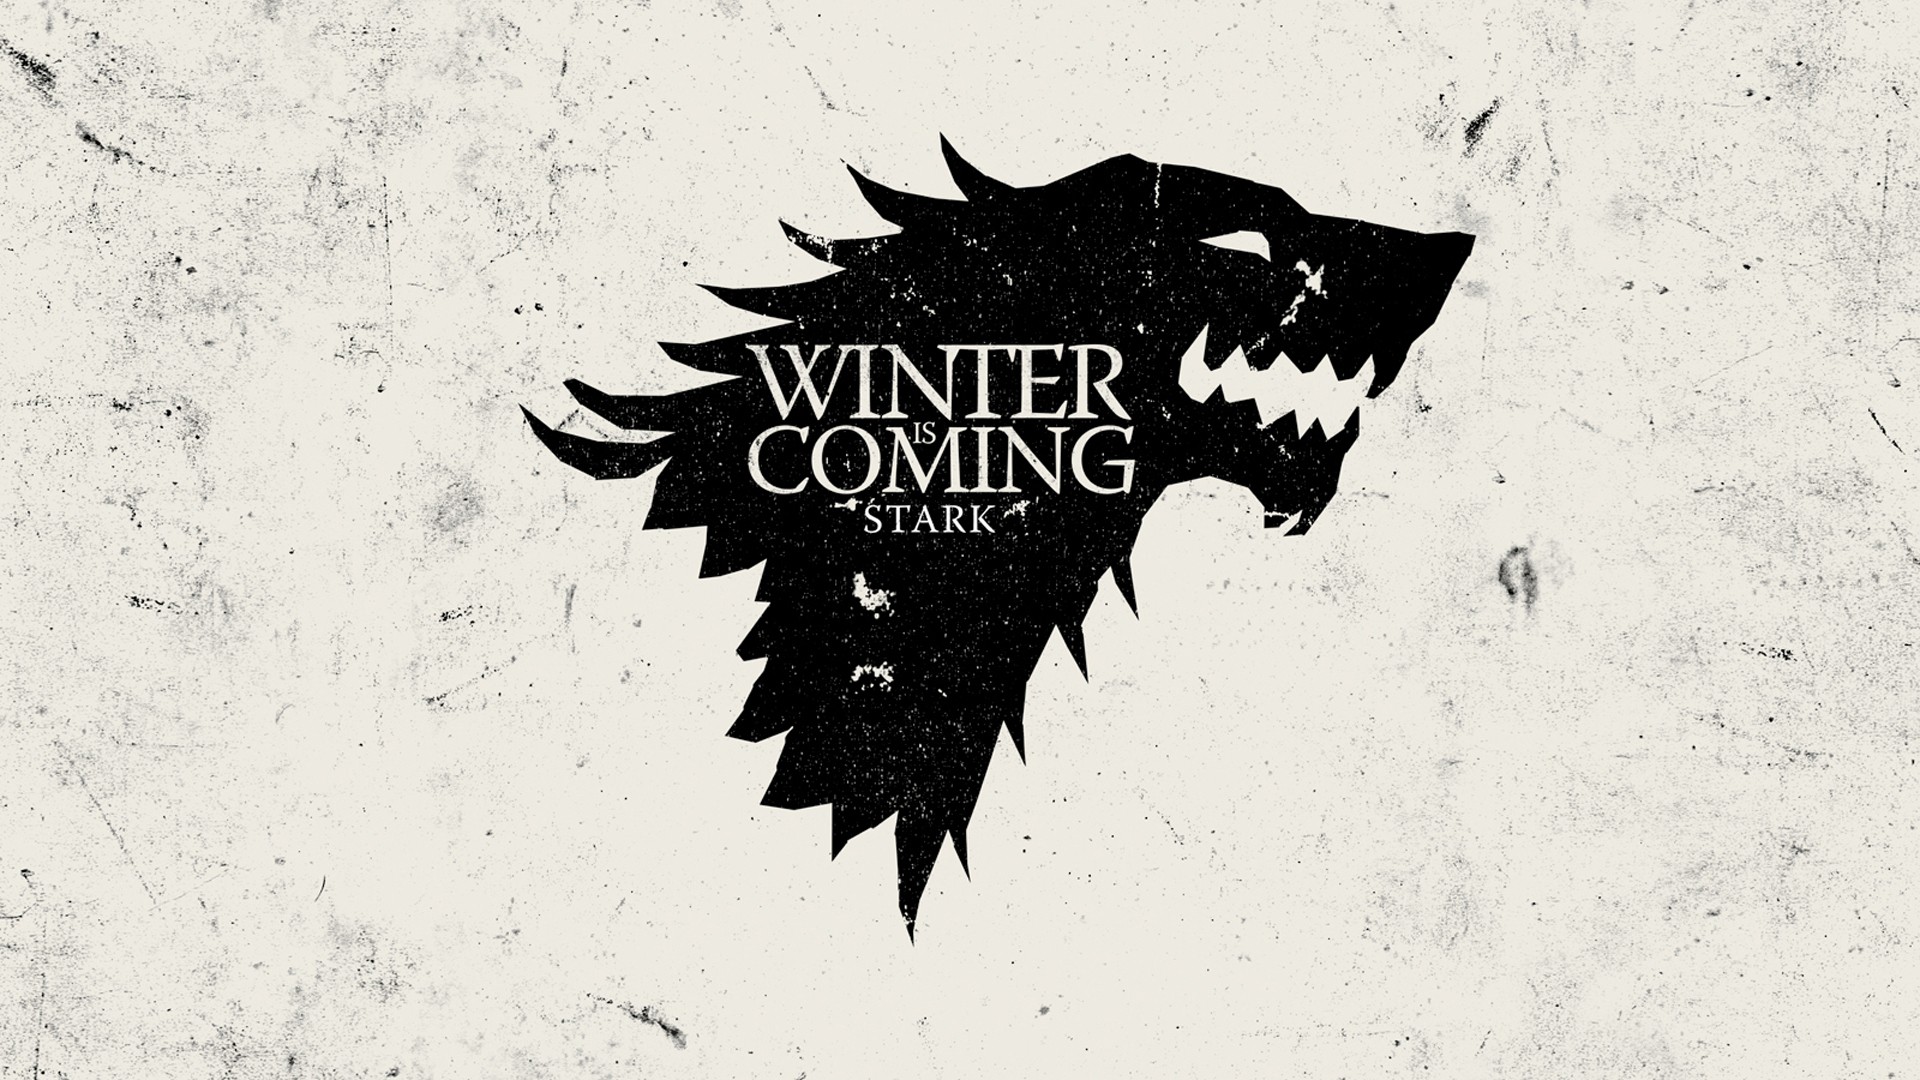 Sigils Game Of Thrones House Stark Winter Is Coming Monochrome 1920x1080